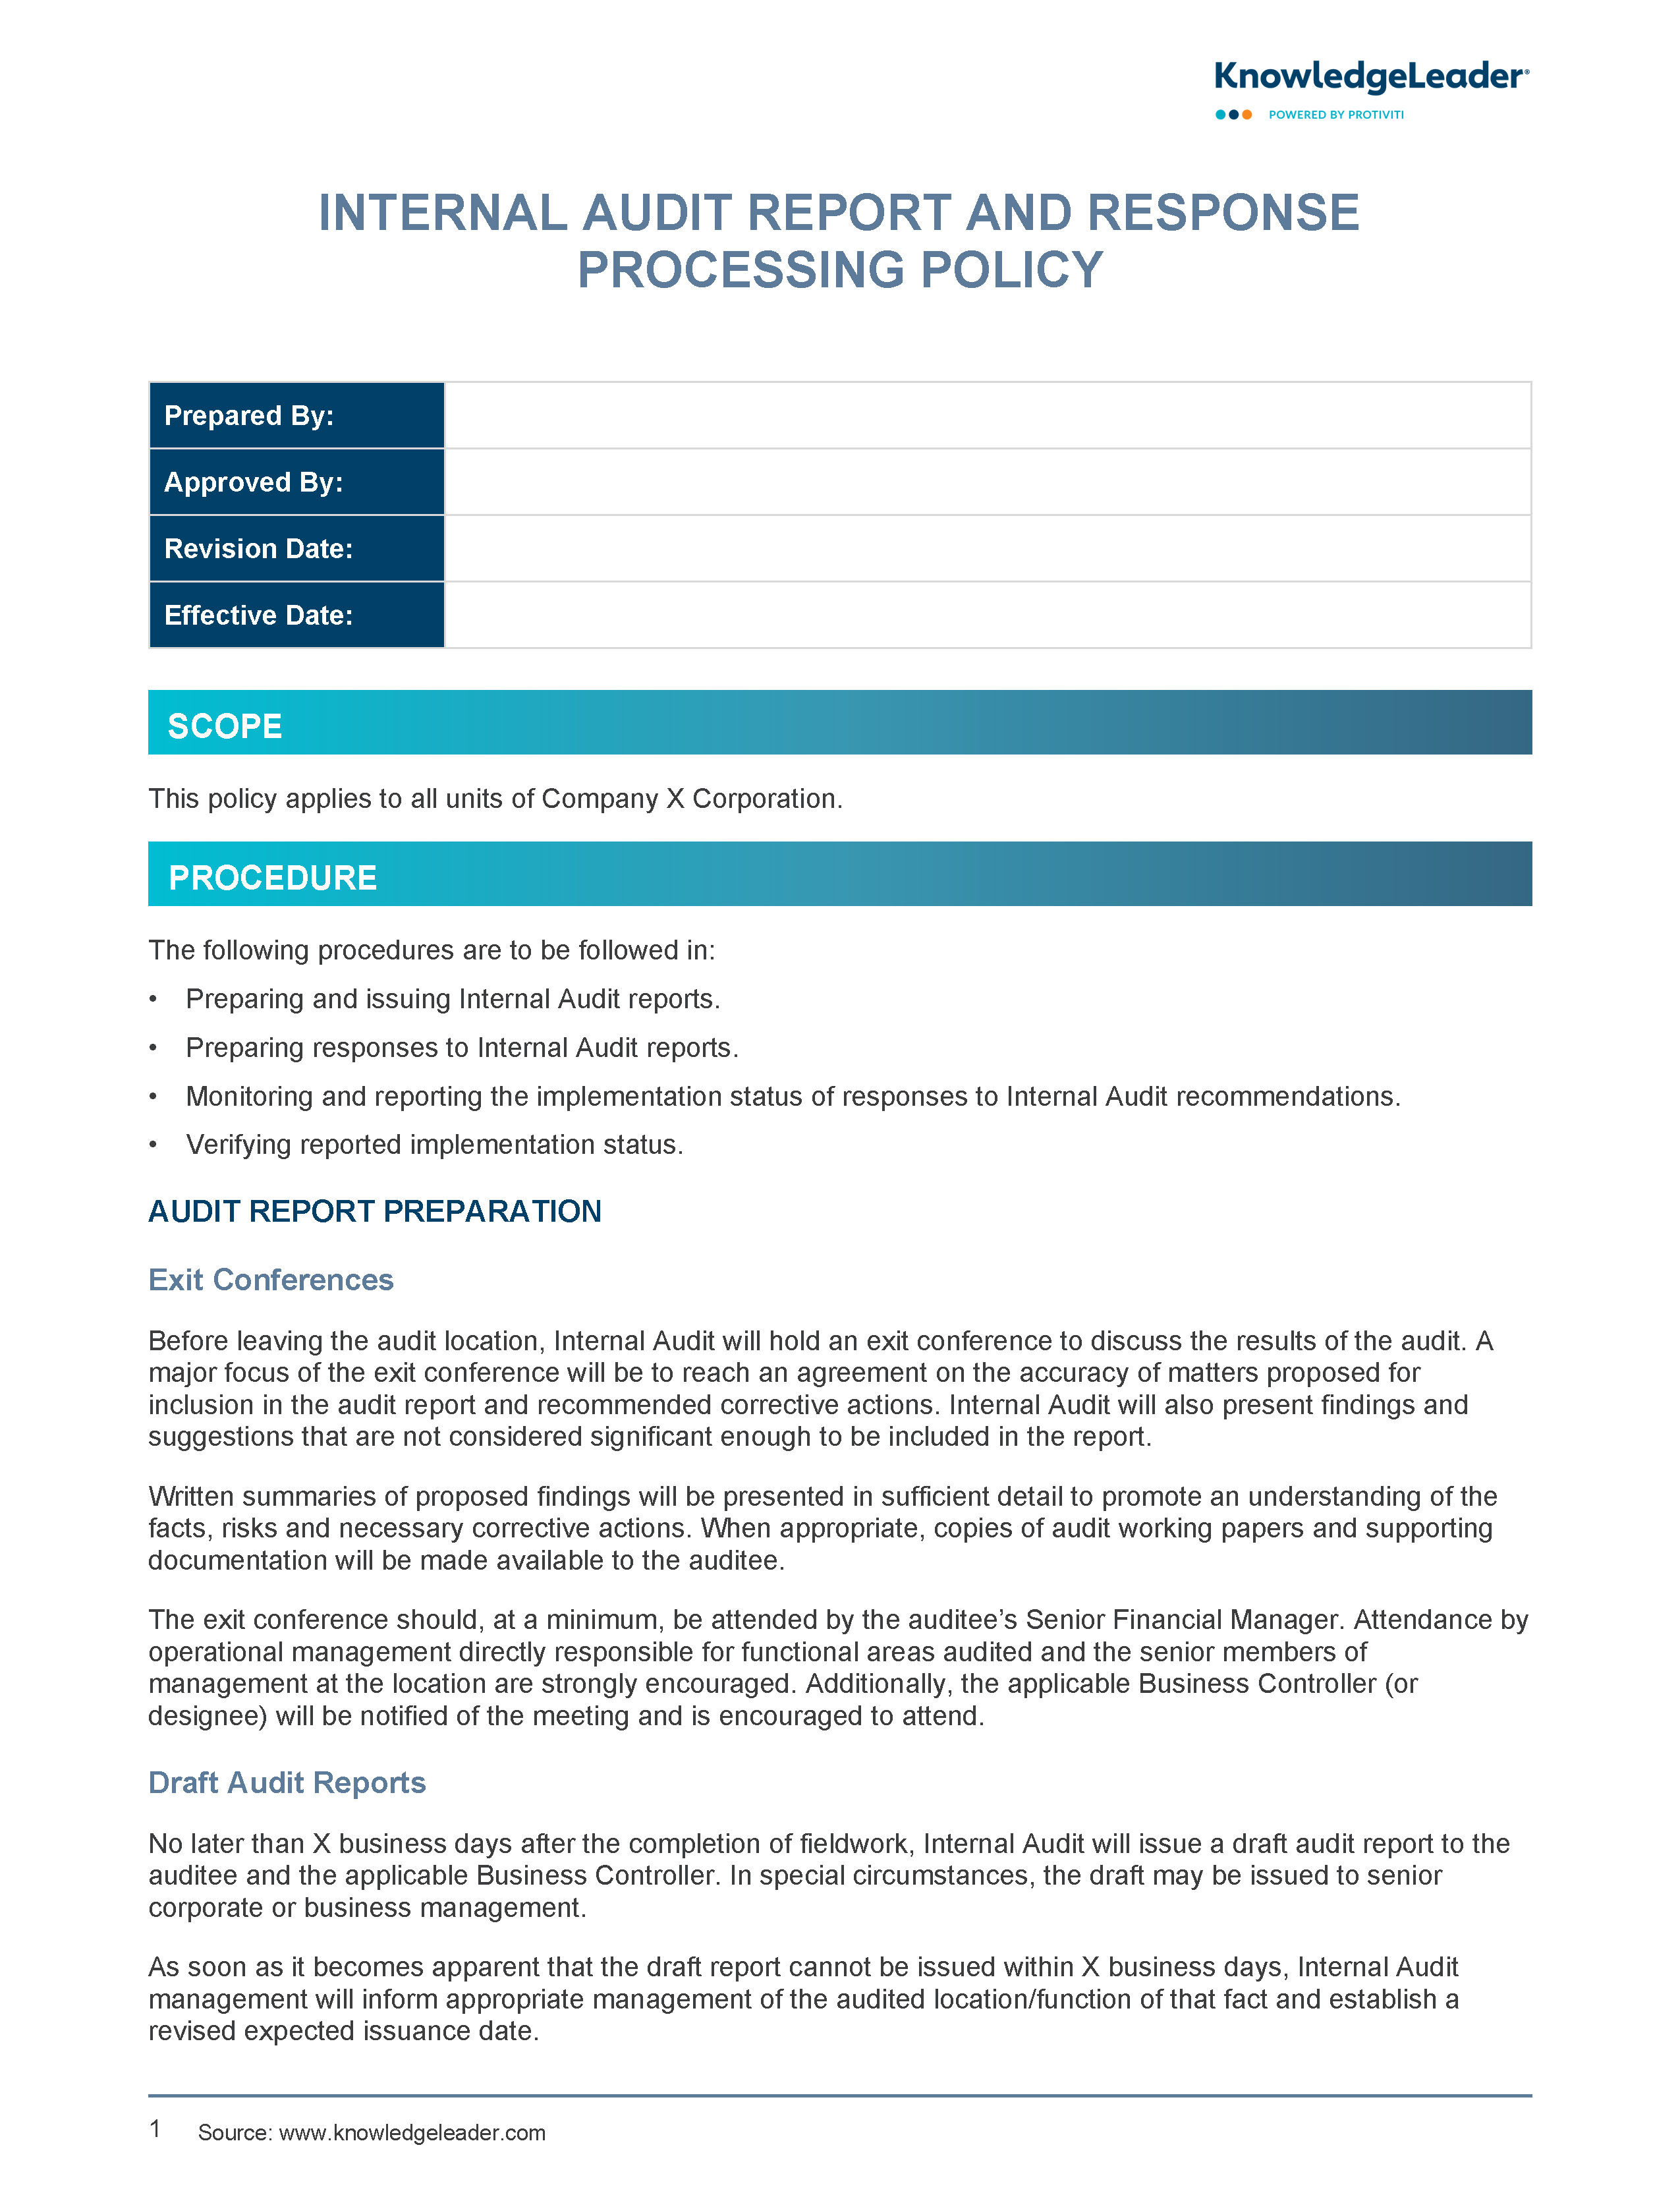 Screenshot of the first page of Internal Audit Report and Response Processing Policy